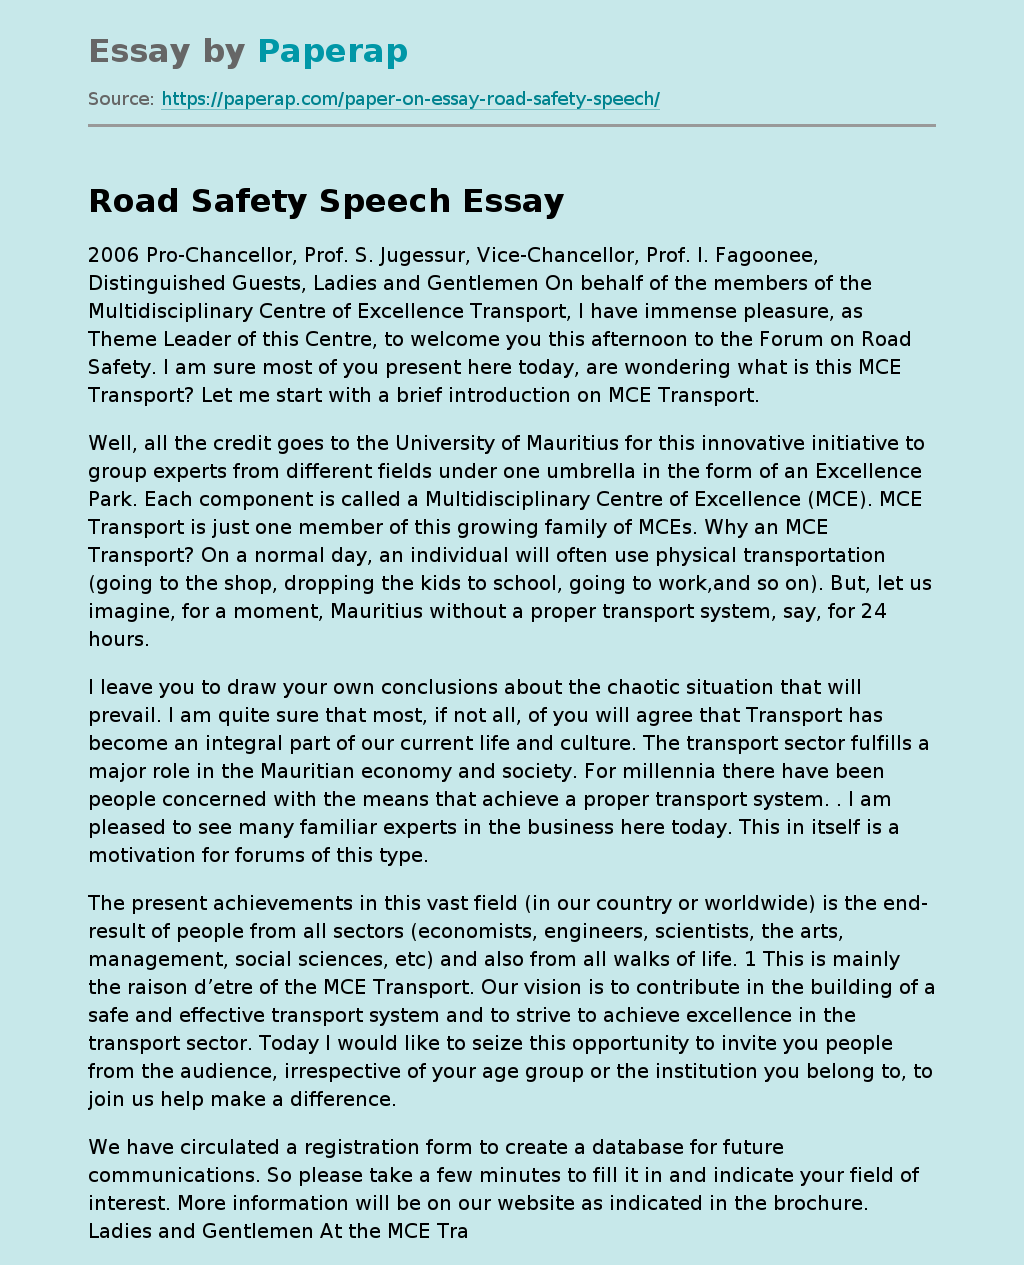 road safety essay in english 200 words